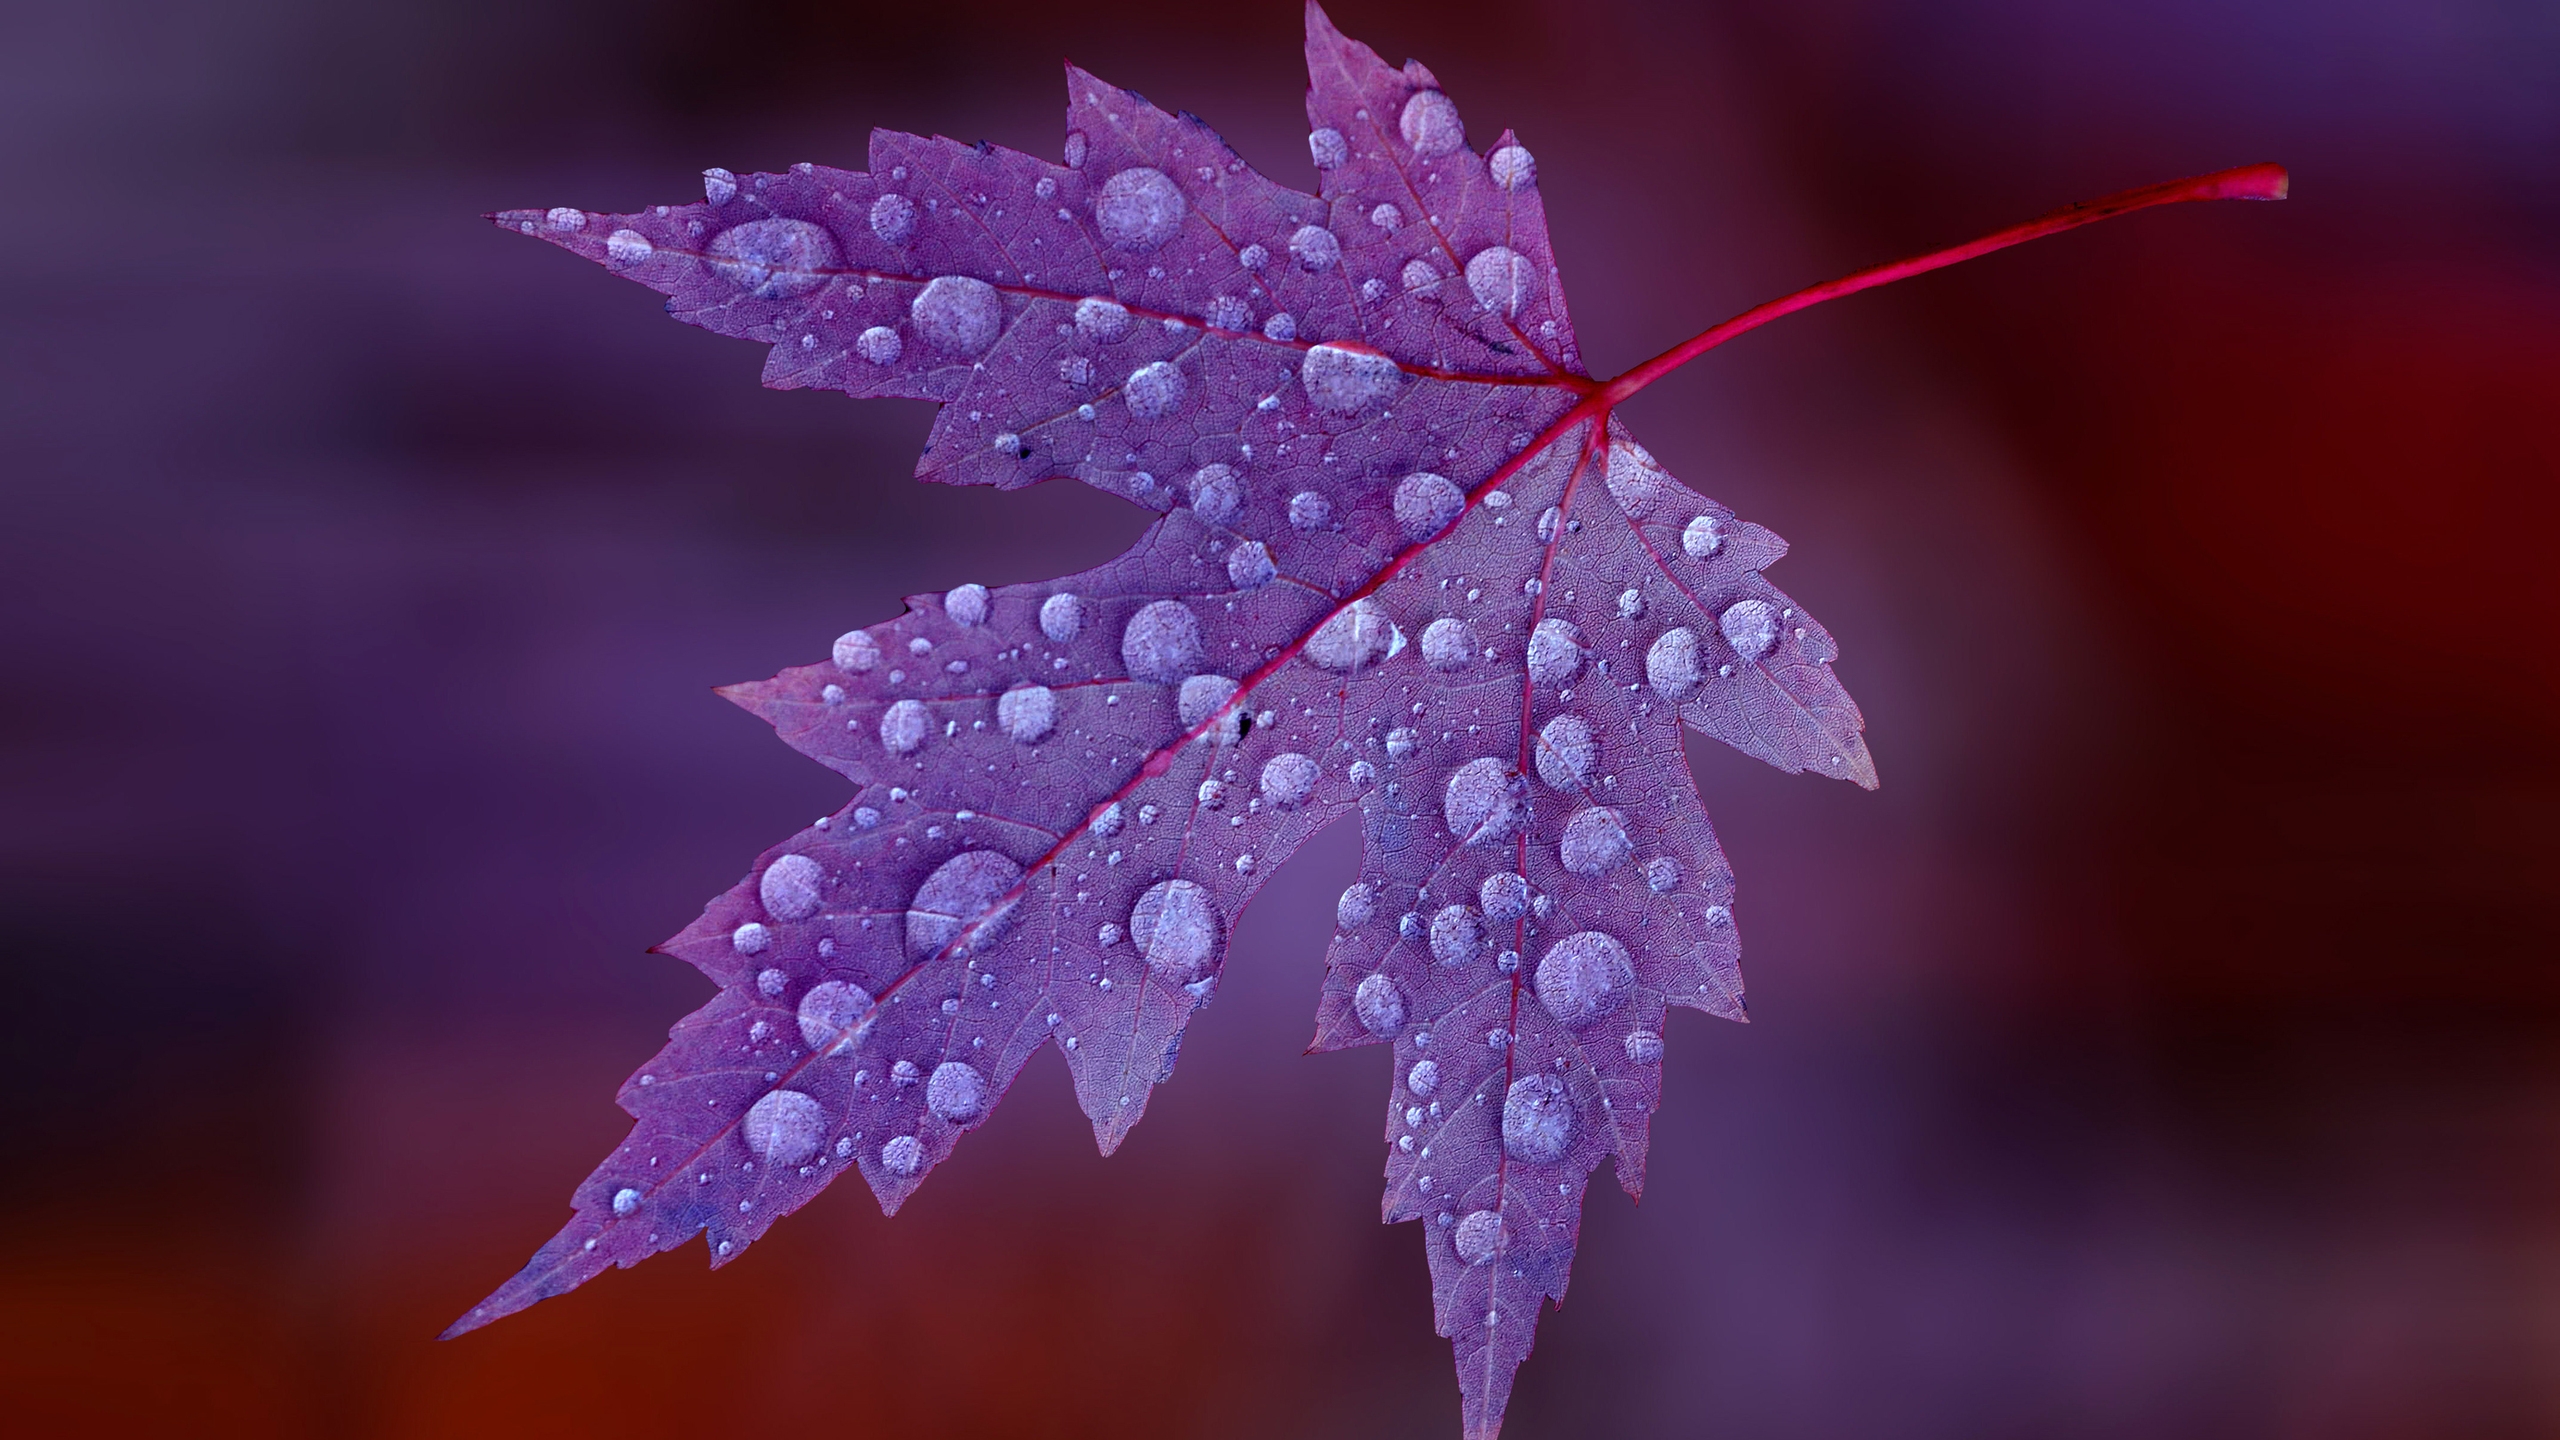 Water Drops on Purple Leaf  for 2560x1440 HDTV resolution